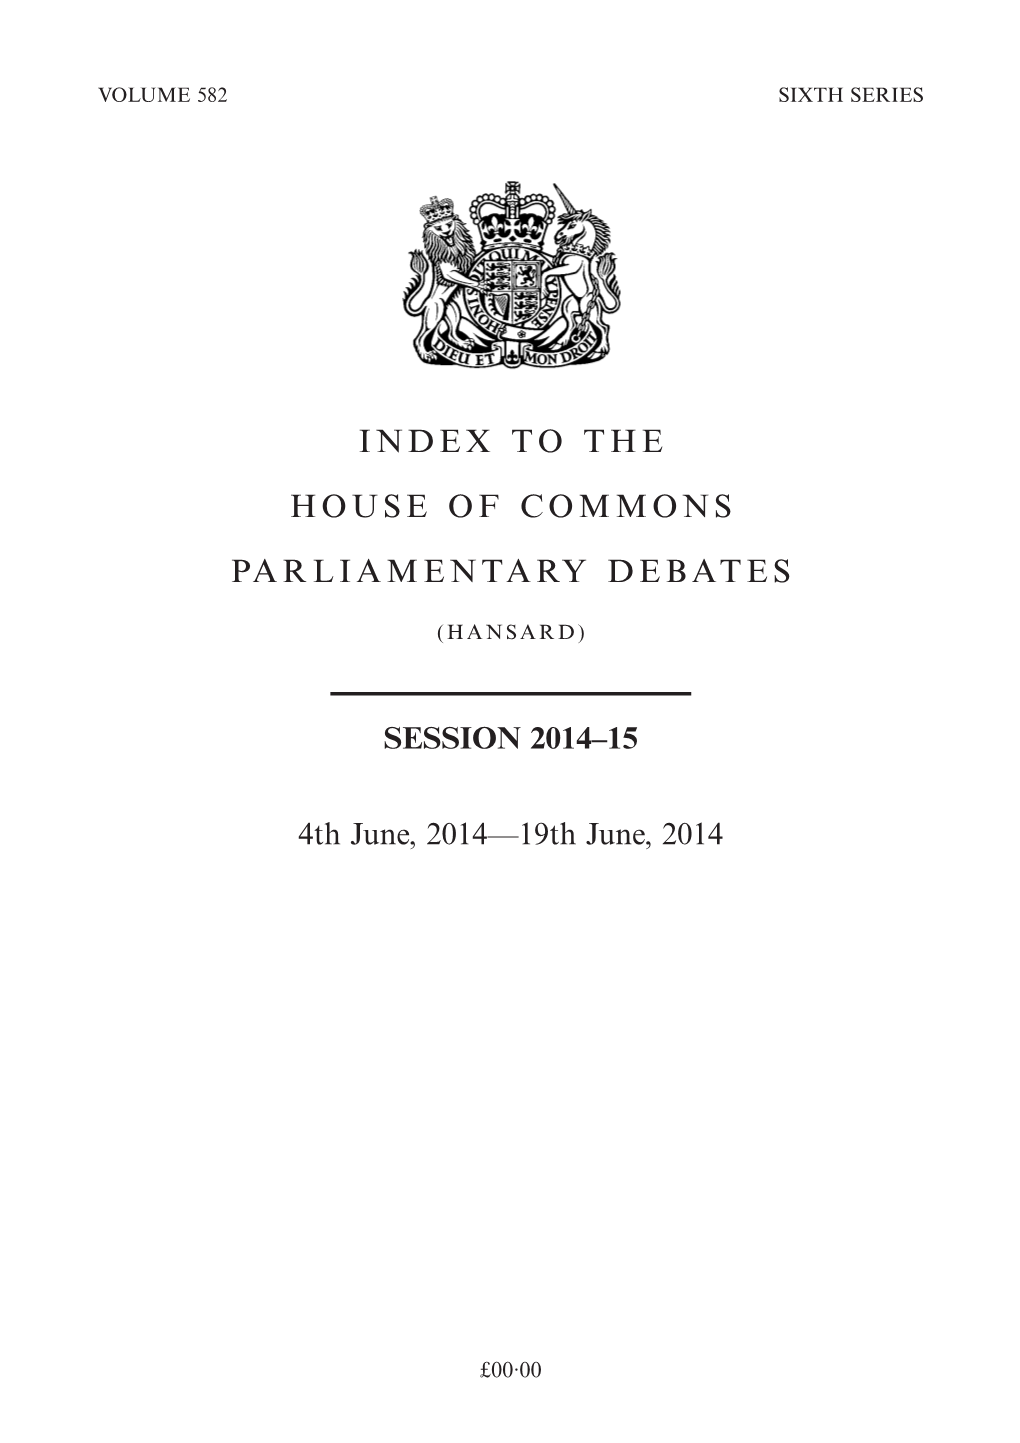 To the House of Commons Parliamentary Debates